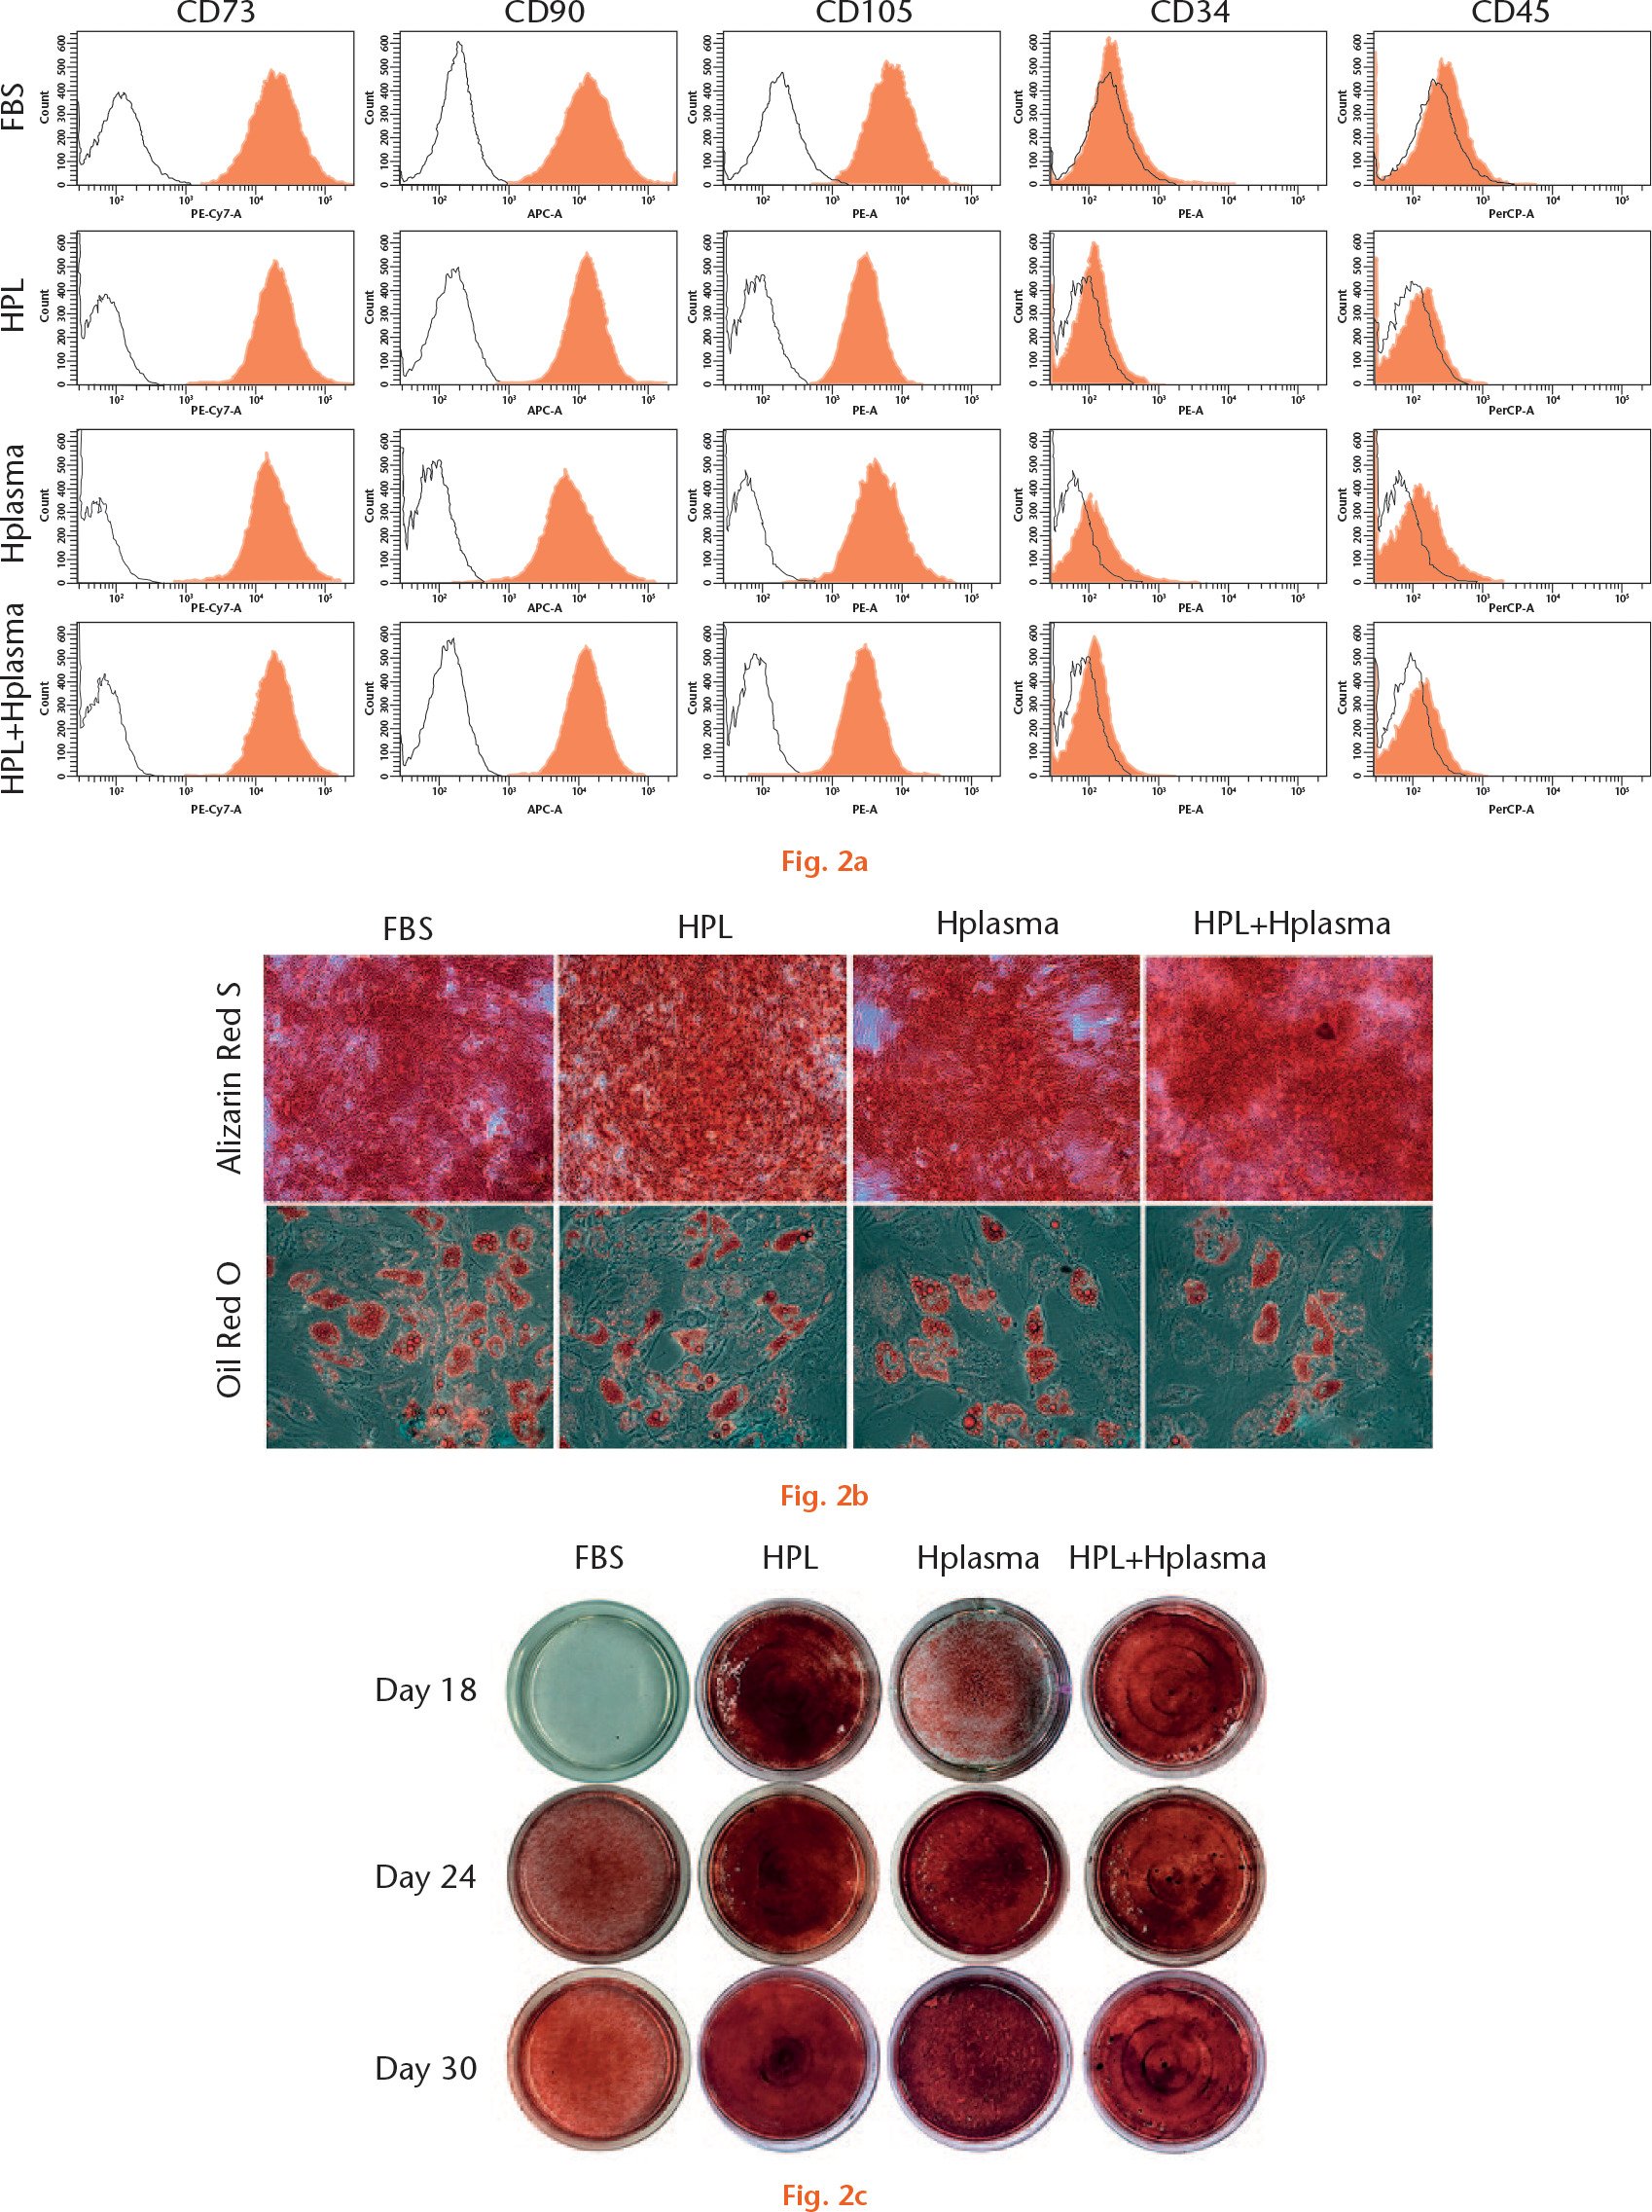  
            Characterisation of Adipose-derived mesenchymal stem cells (ADMSCs) after long-term culture in different supplements: a) immunophenotype of ADMSCs was determined by flow cytometry; b) osteogenic and adipogenic differentiation of ADMSCs was assessed by Alizarin Red S and Oil Red O staining, respectively; c) macroscopic examination of osteogenic differentiation which was assessed by Alizarin Red S staining at days 18, 24, and 30 (FBS, fetal bovine serum; HPL, human platelet lysate; Hplasma, human plasma).
          